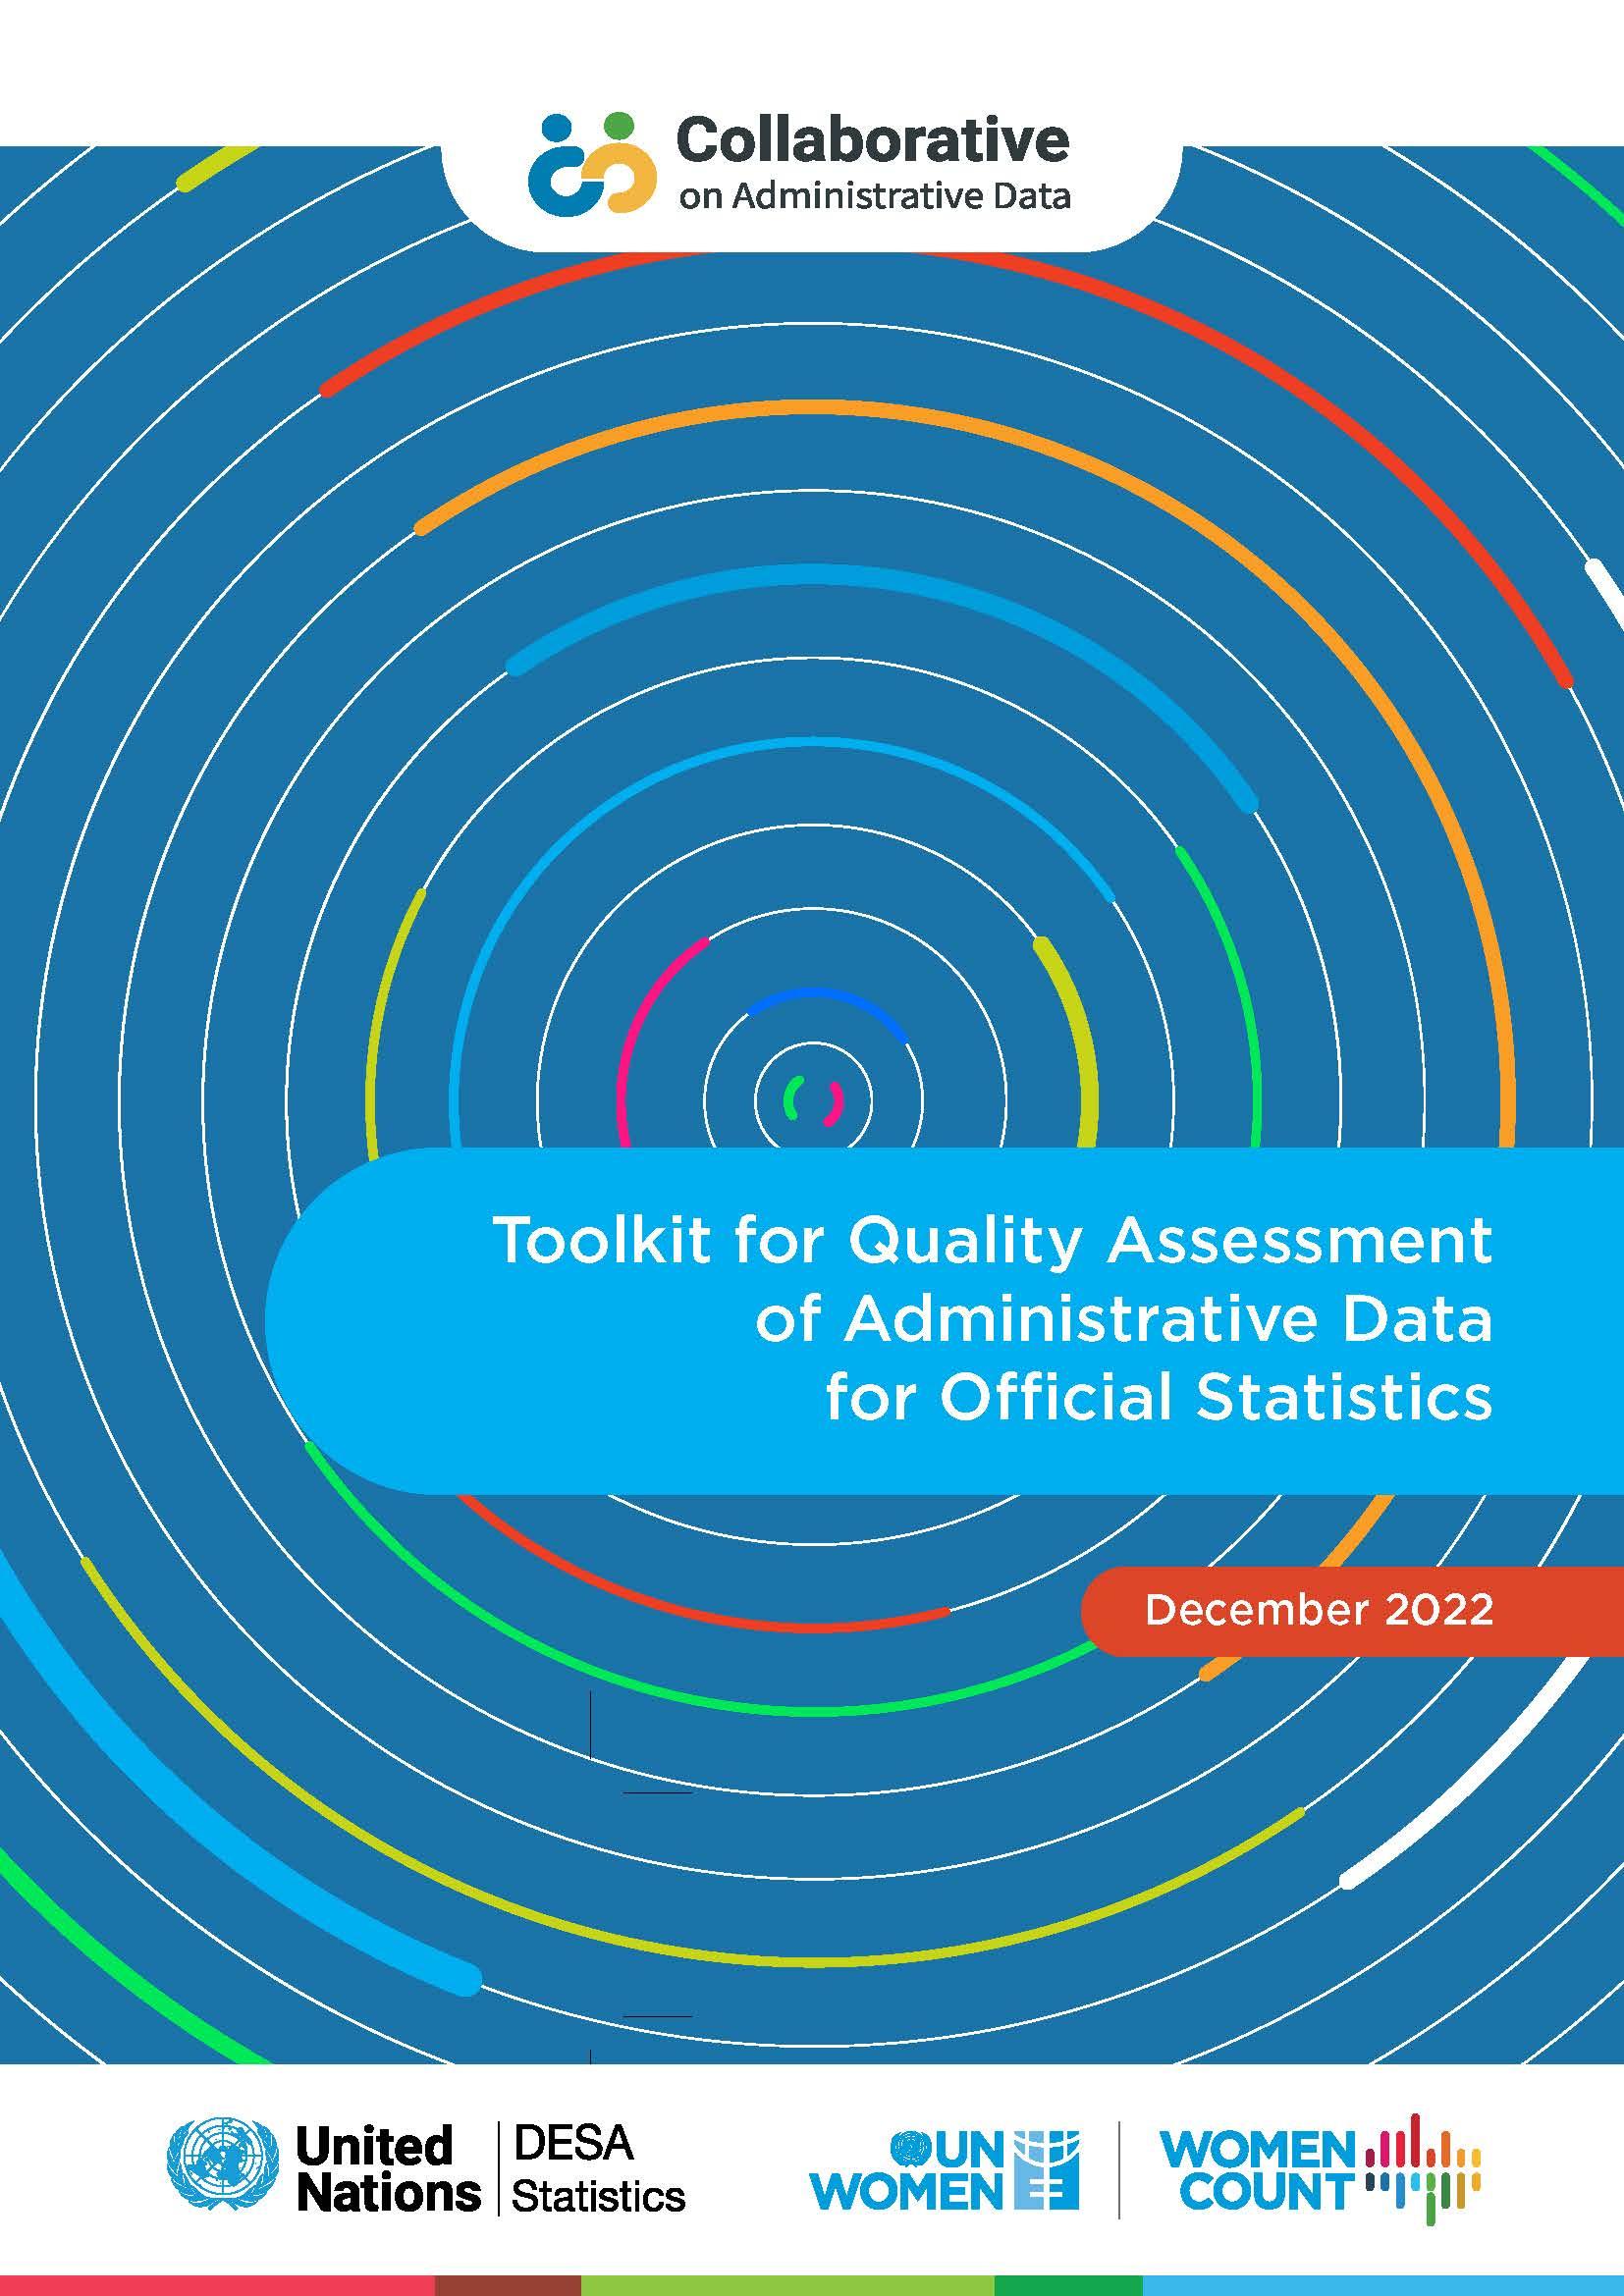 Toolkit for Quality Assessment of Administrative Data for Official Statistics